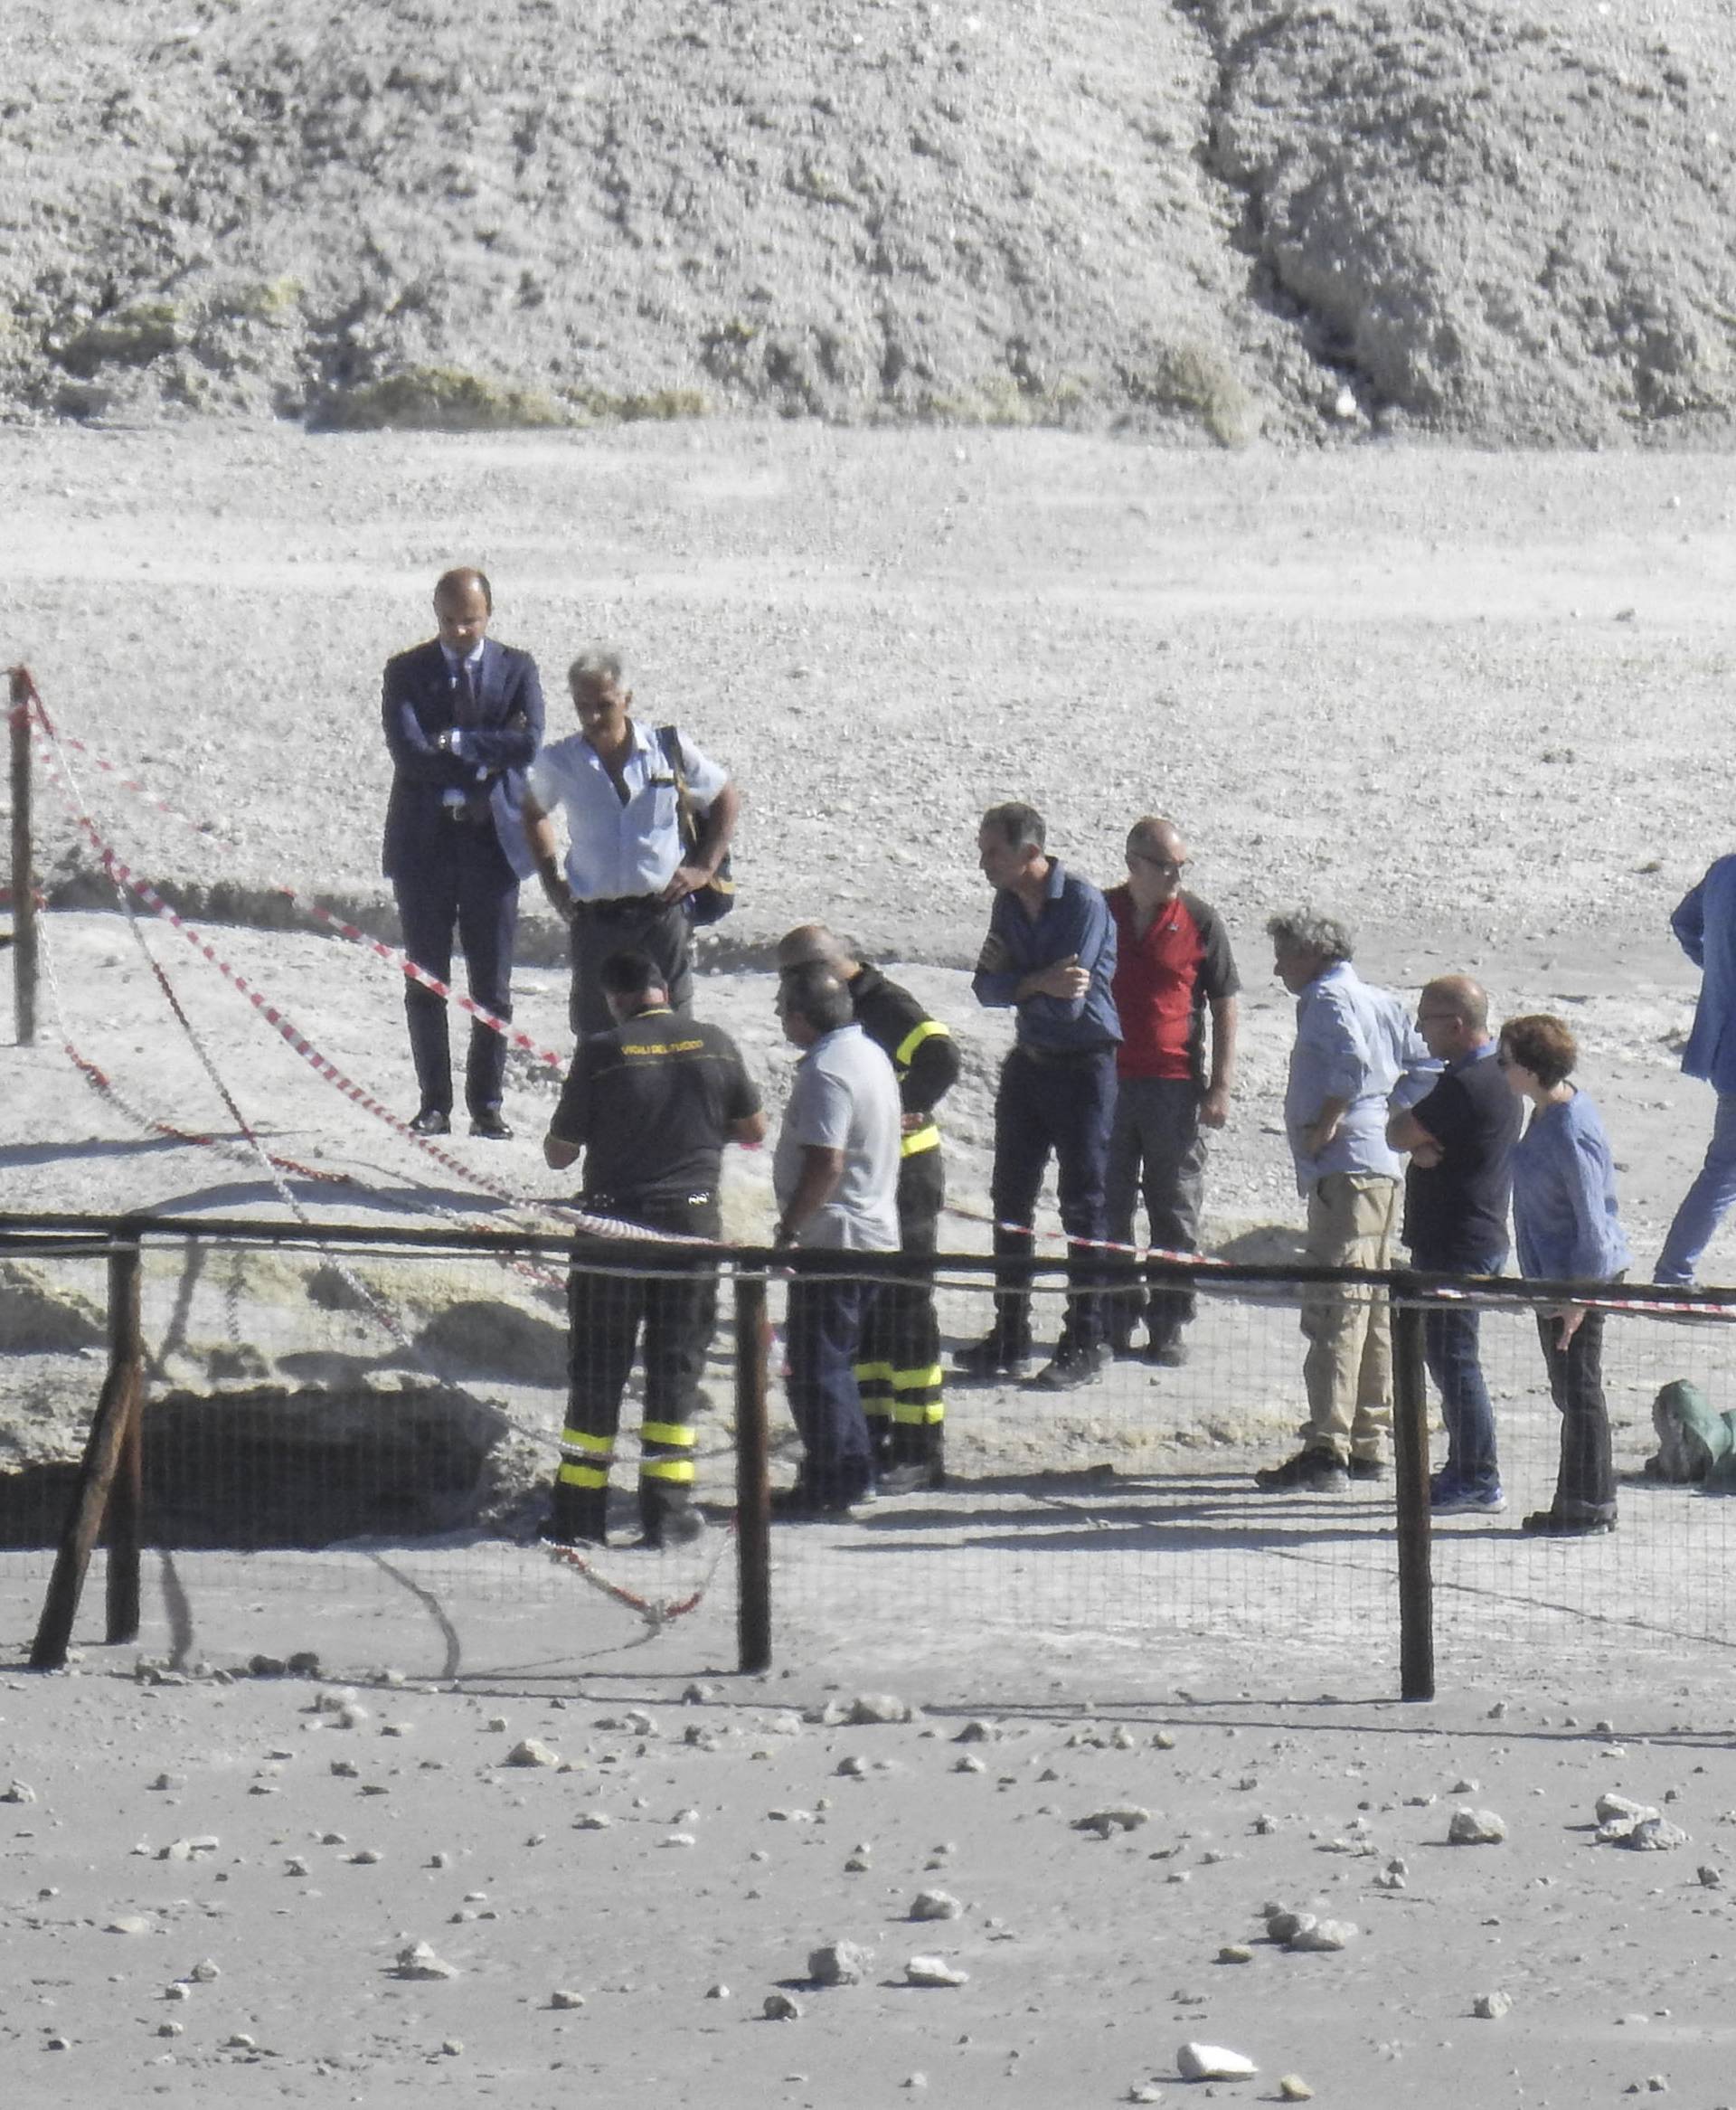 Three Venice tourists died swallowed by a crater that suddenly opened under their feet in the Solfatara of Pozzuoli.